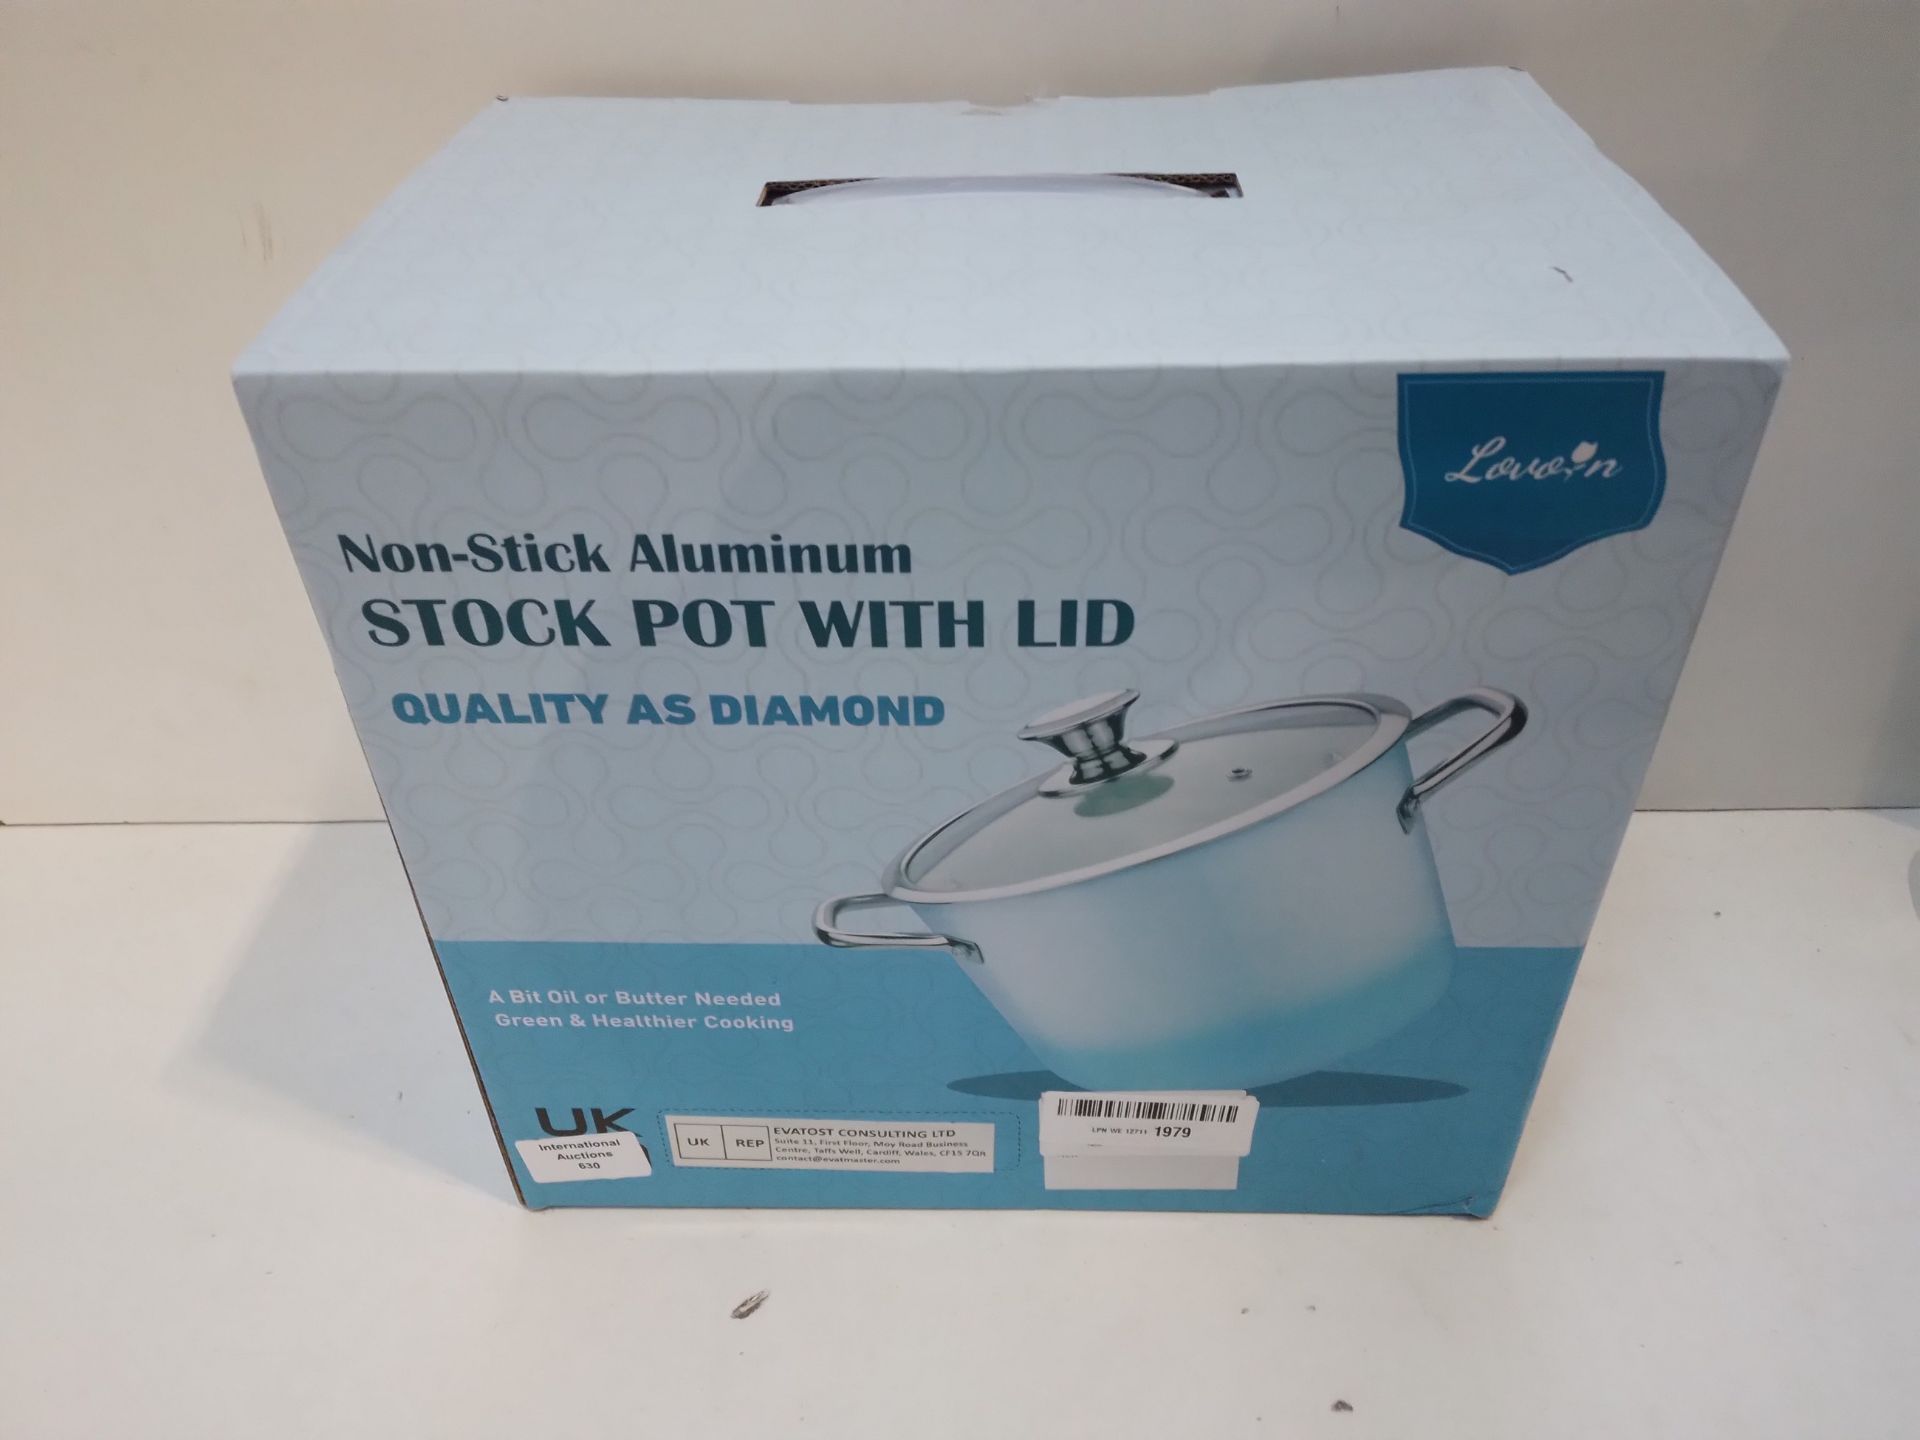 RRP £39.98 LovoIn 6.6L Stock Pot with Lid - Image 2 of 2